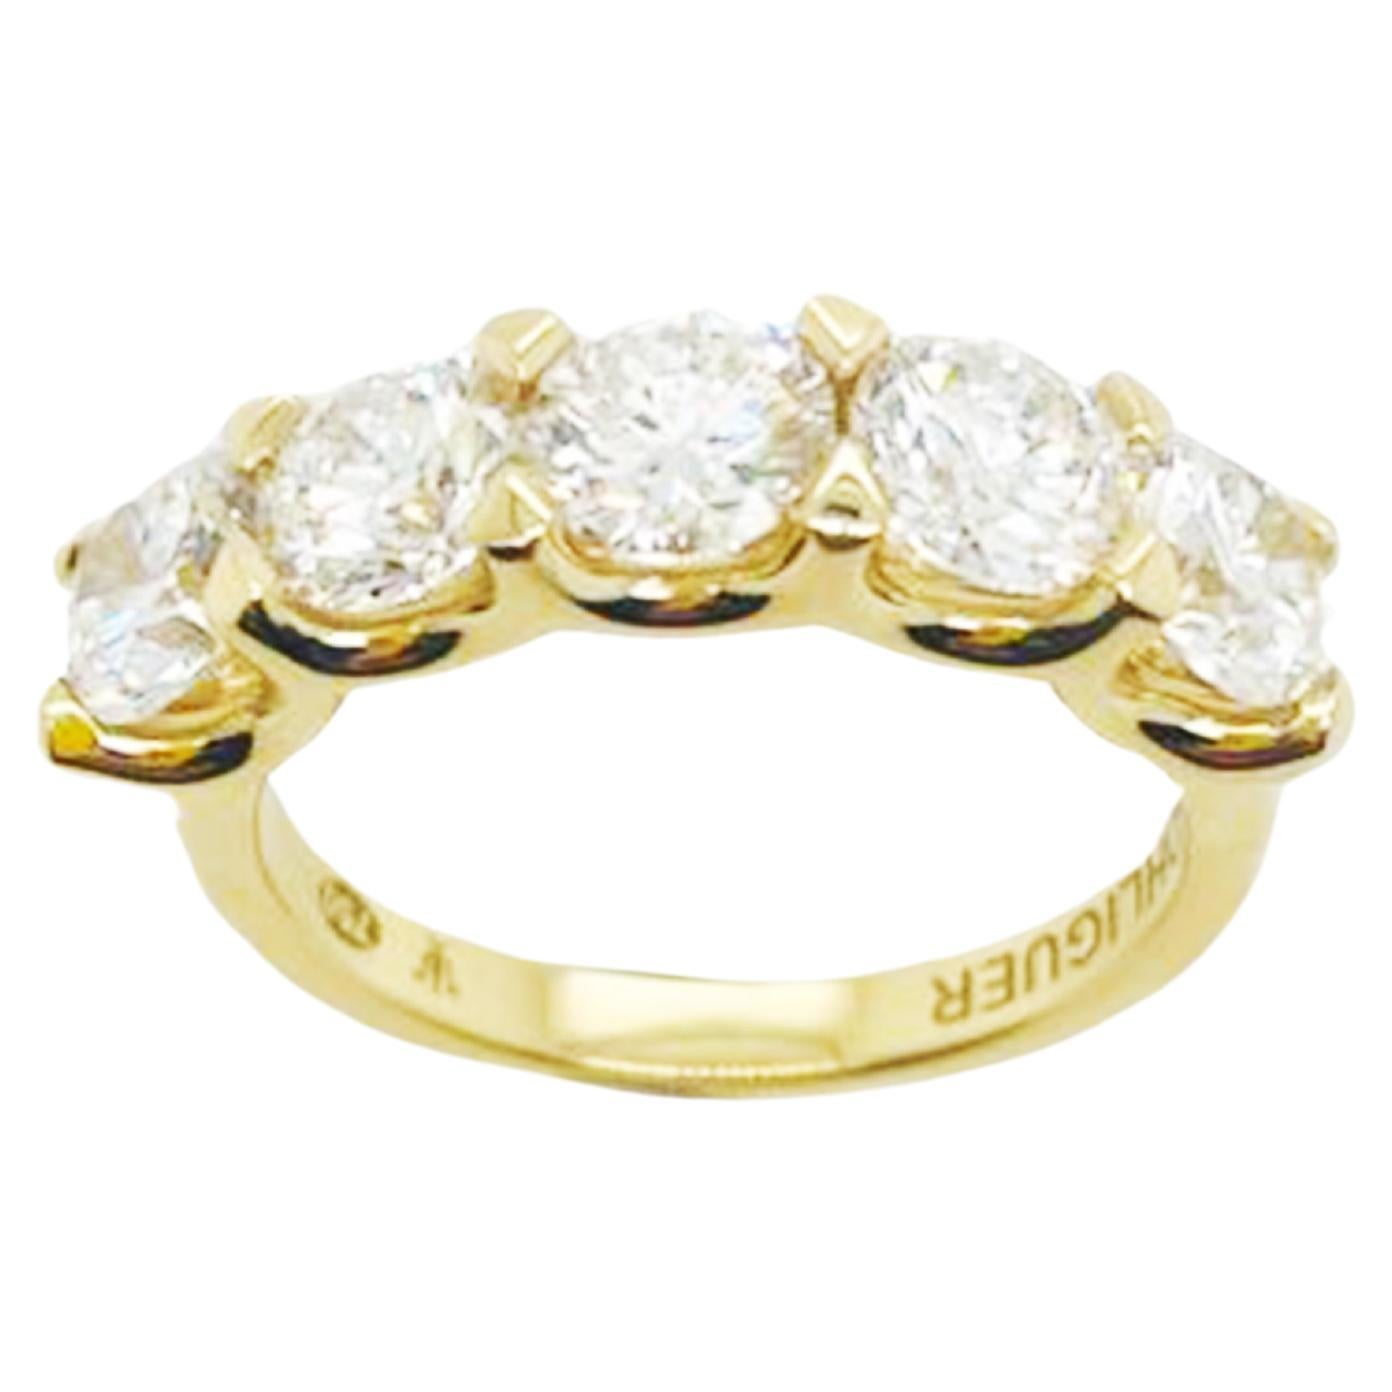 Artisan 2.50ct White Diamond ring set in 18ct yellow gold Eternity band For Sale